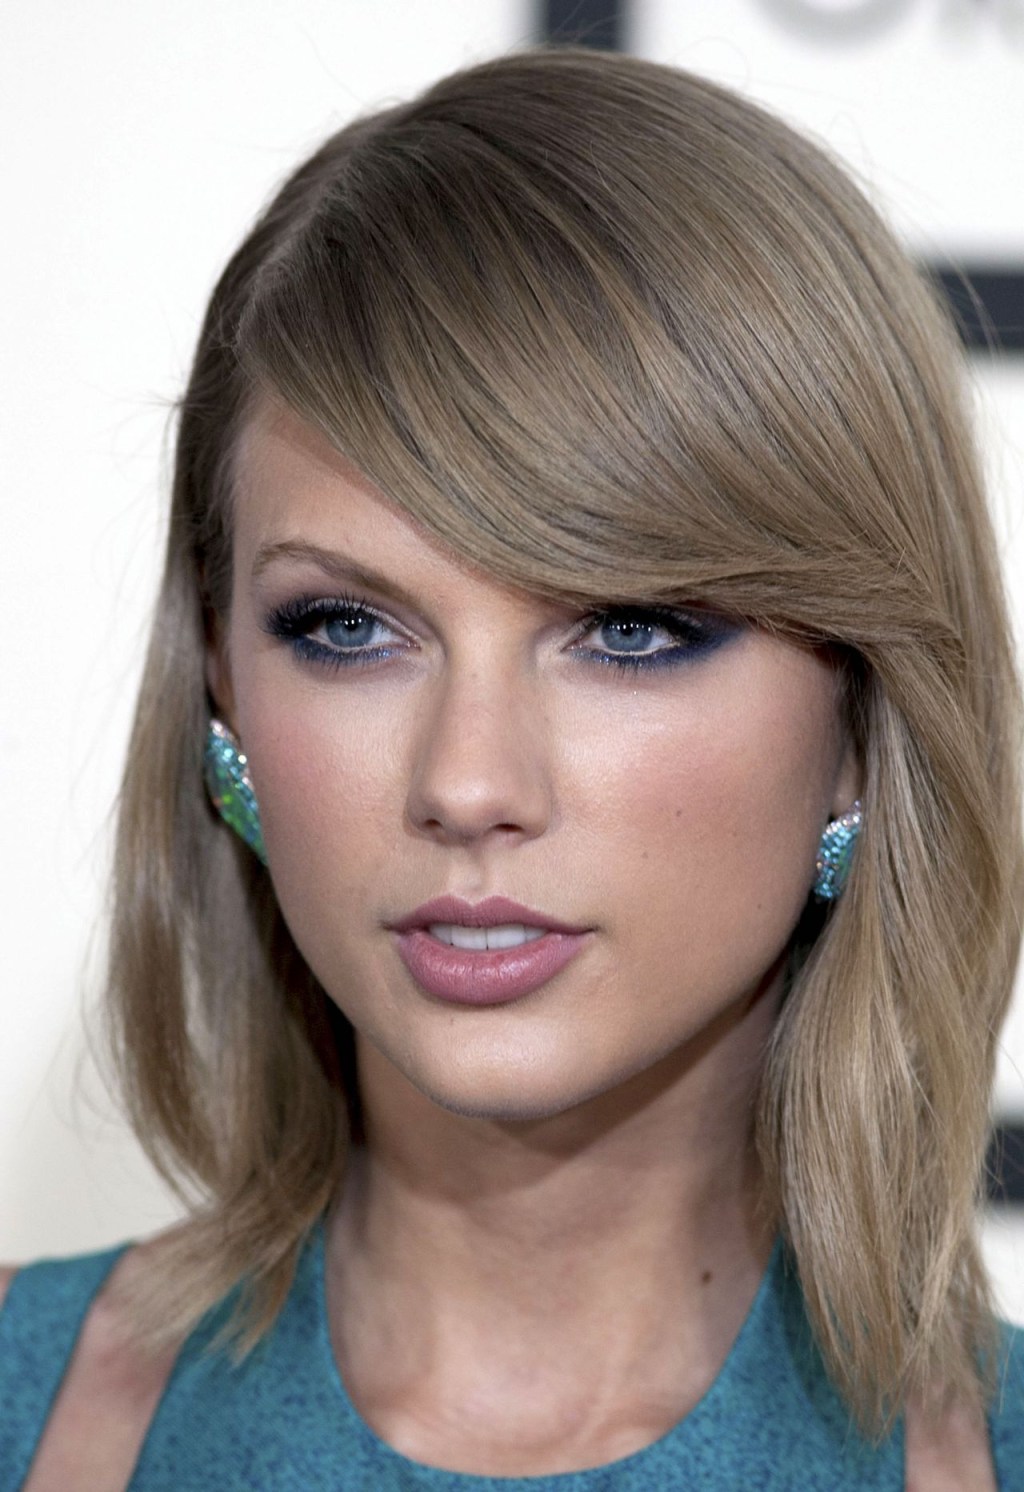 Picture of Taylor Swift in General Pictures - taylor-swift-1426446127 ...